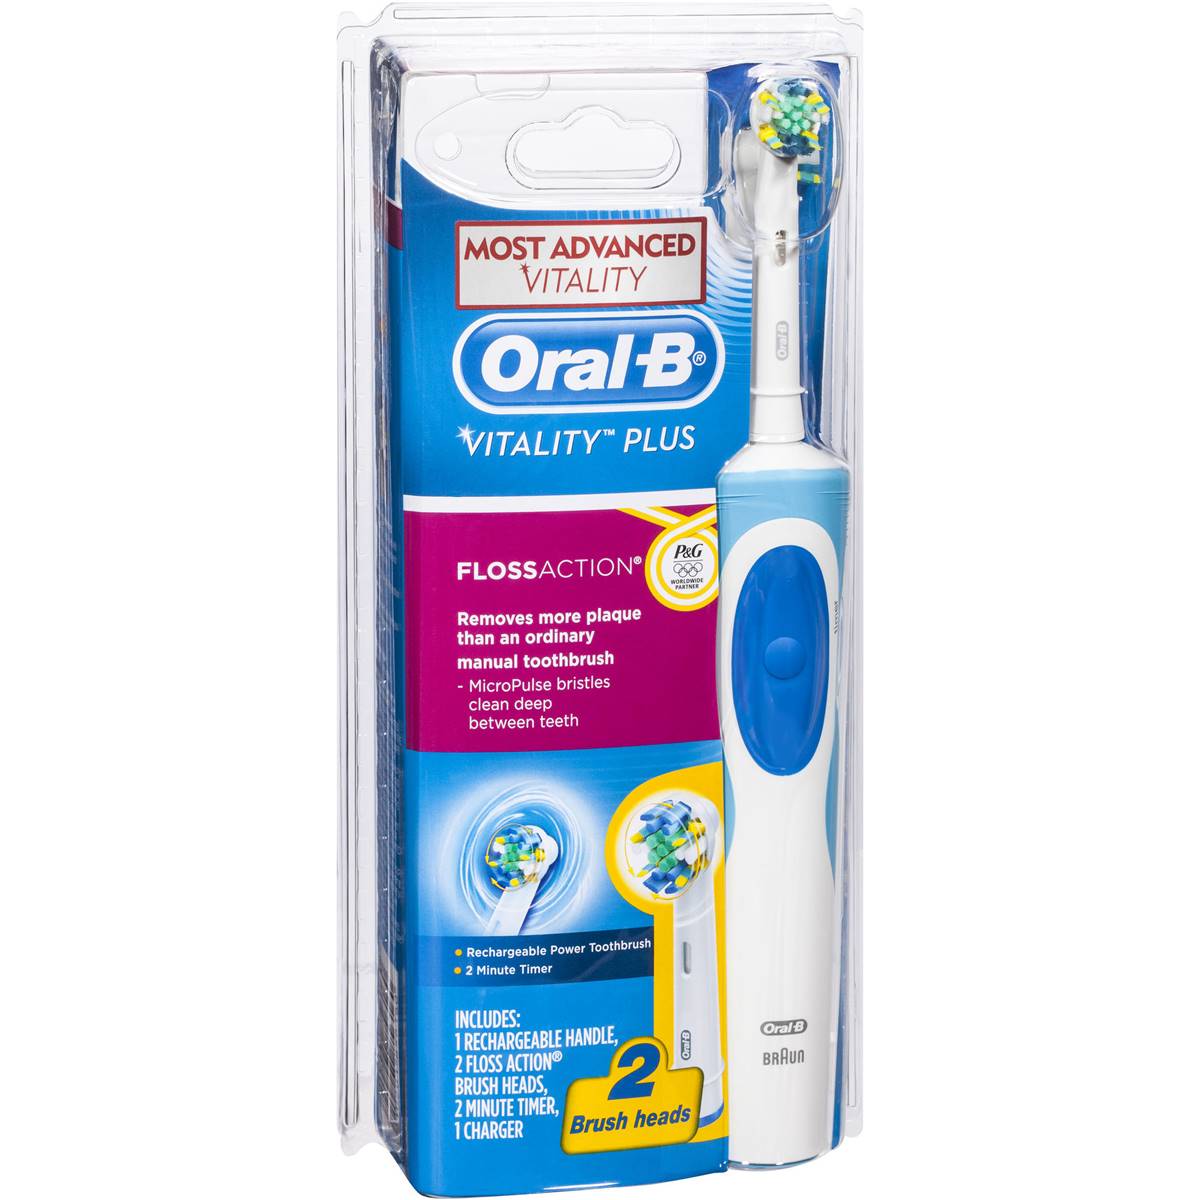 Oral-b Vitality Plus Powered Toothbrush Floss Action